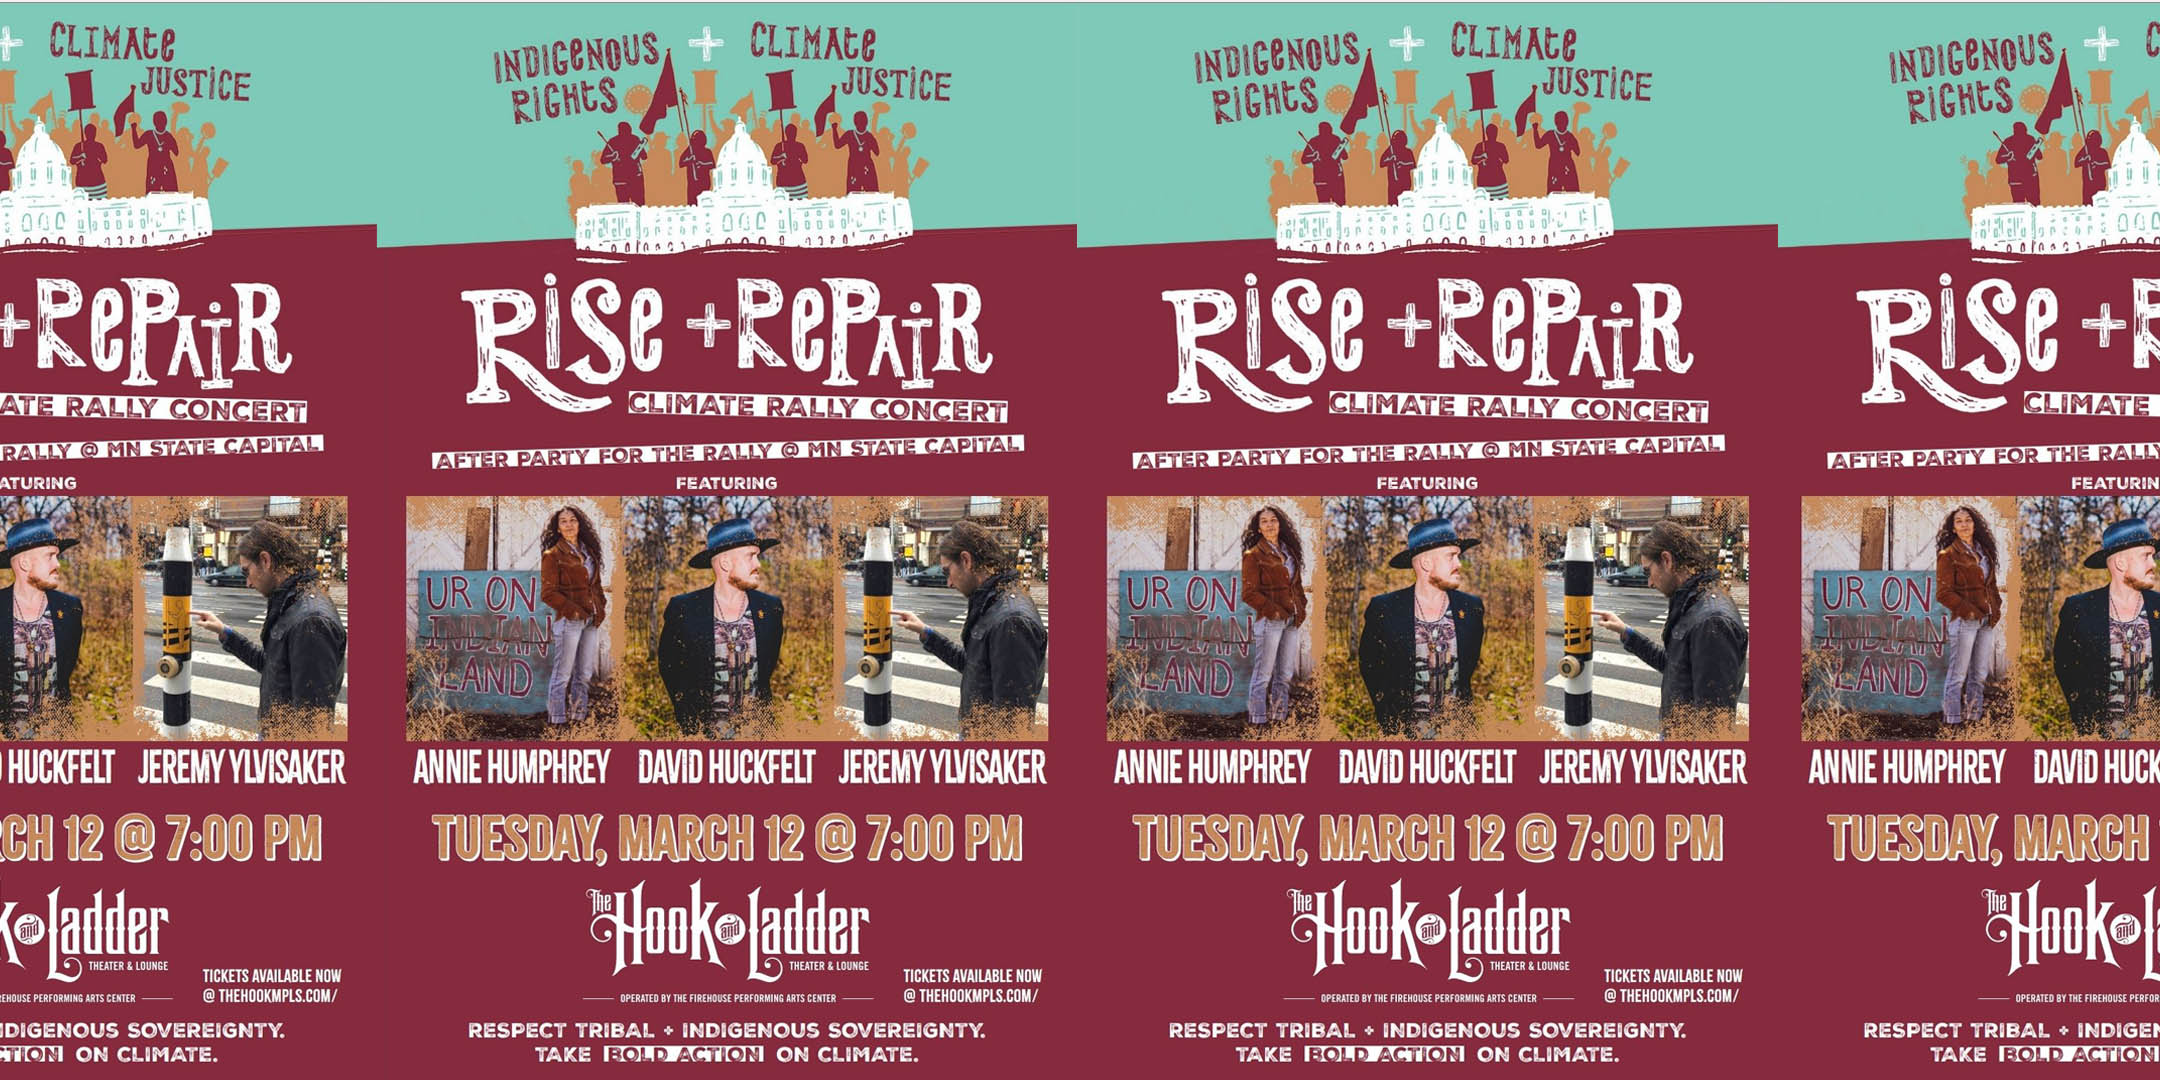 RISE + REPAIR: Climate Rally Concert featuring Annie Humphrey, David Huckfelt, & Jeremy Ylvisaker Indigenous Rights + Climate Justice After Party For The Rally & MN State Capital Respect Tribal + Indigenous Sovereignty. Take BOLD ACTION on Climate! The Hook and Ladder Theater Tuesday, March 12 Doors 6pm :: Music 7pm Suggested Donation $30 or donate what you can!